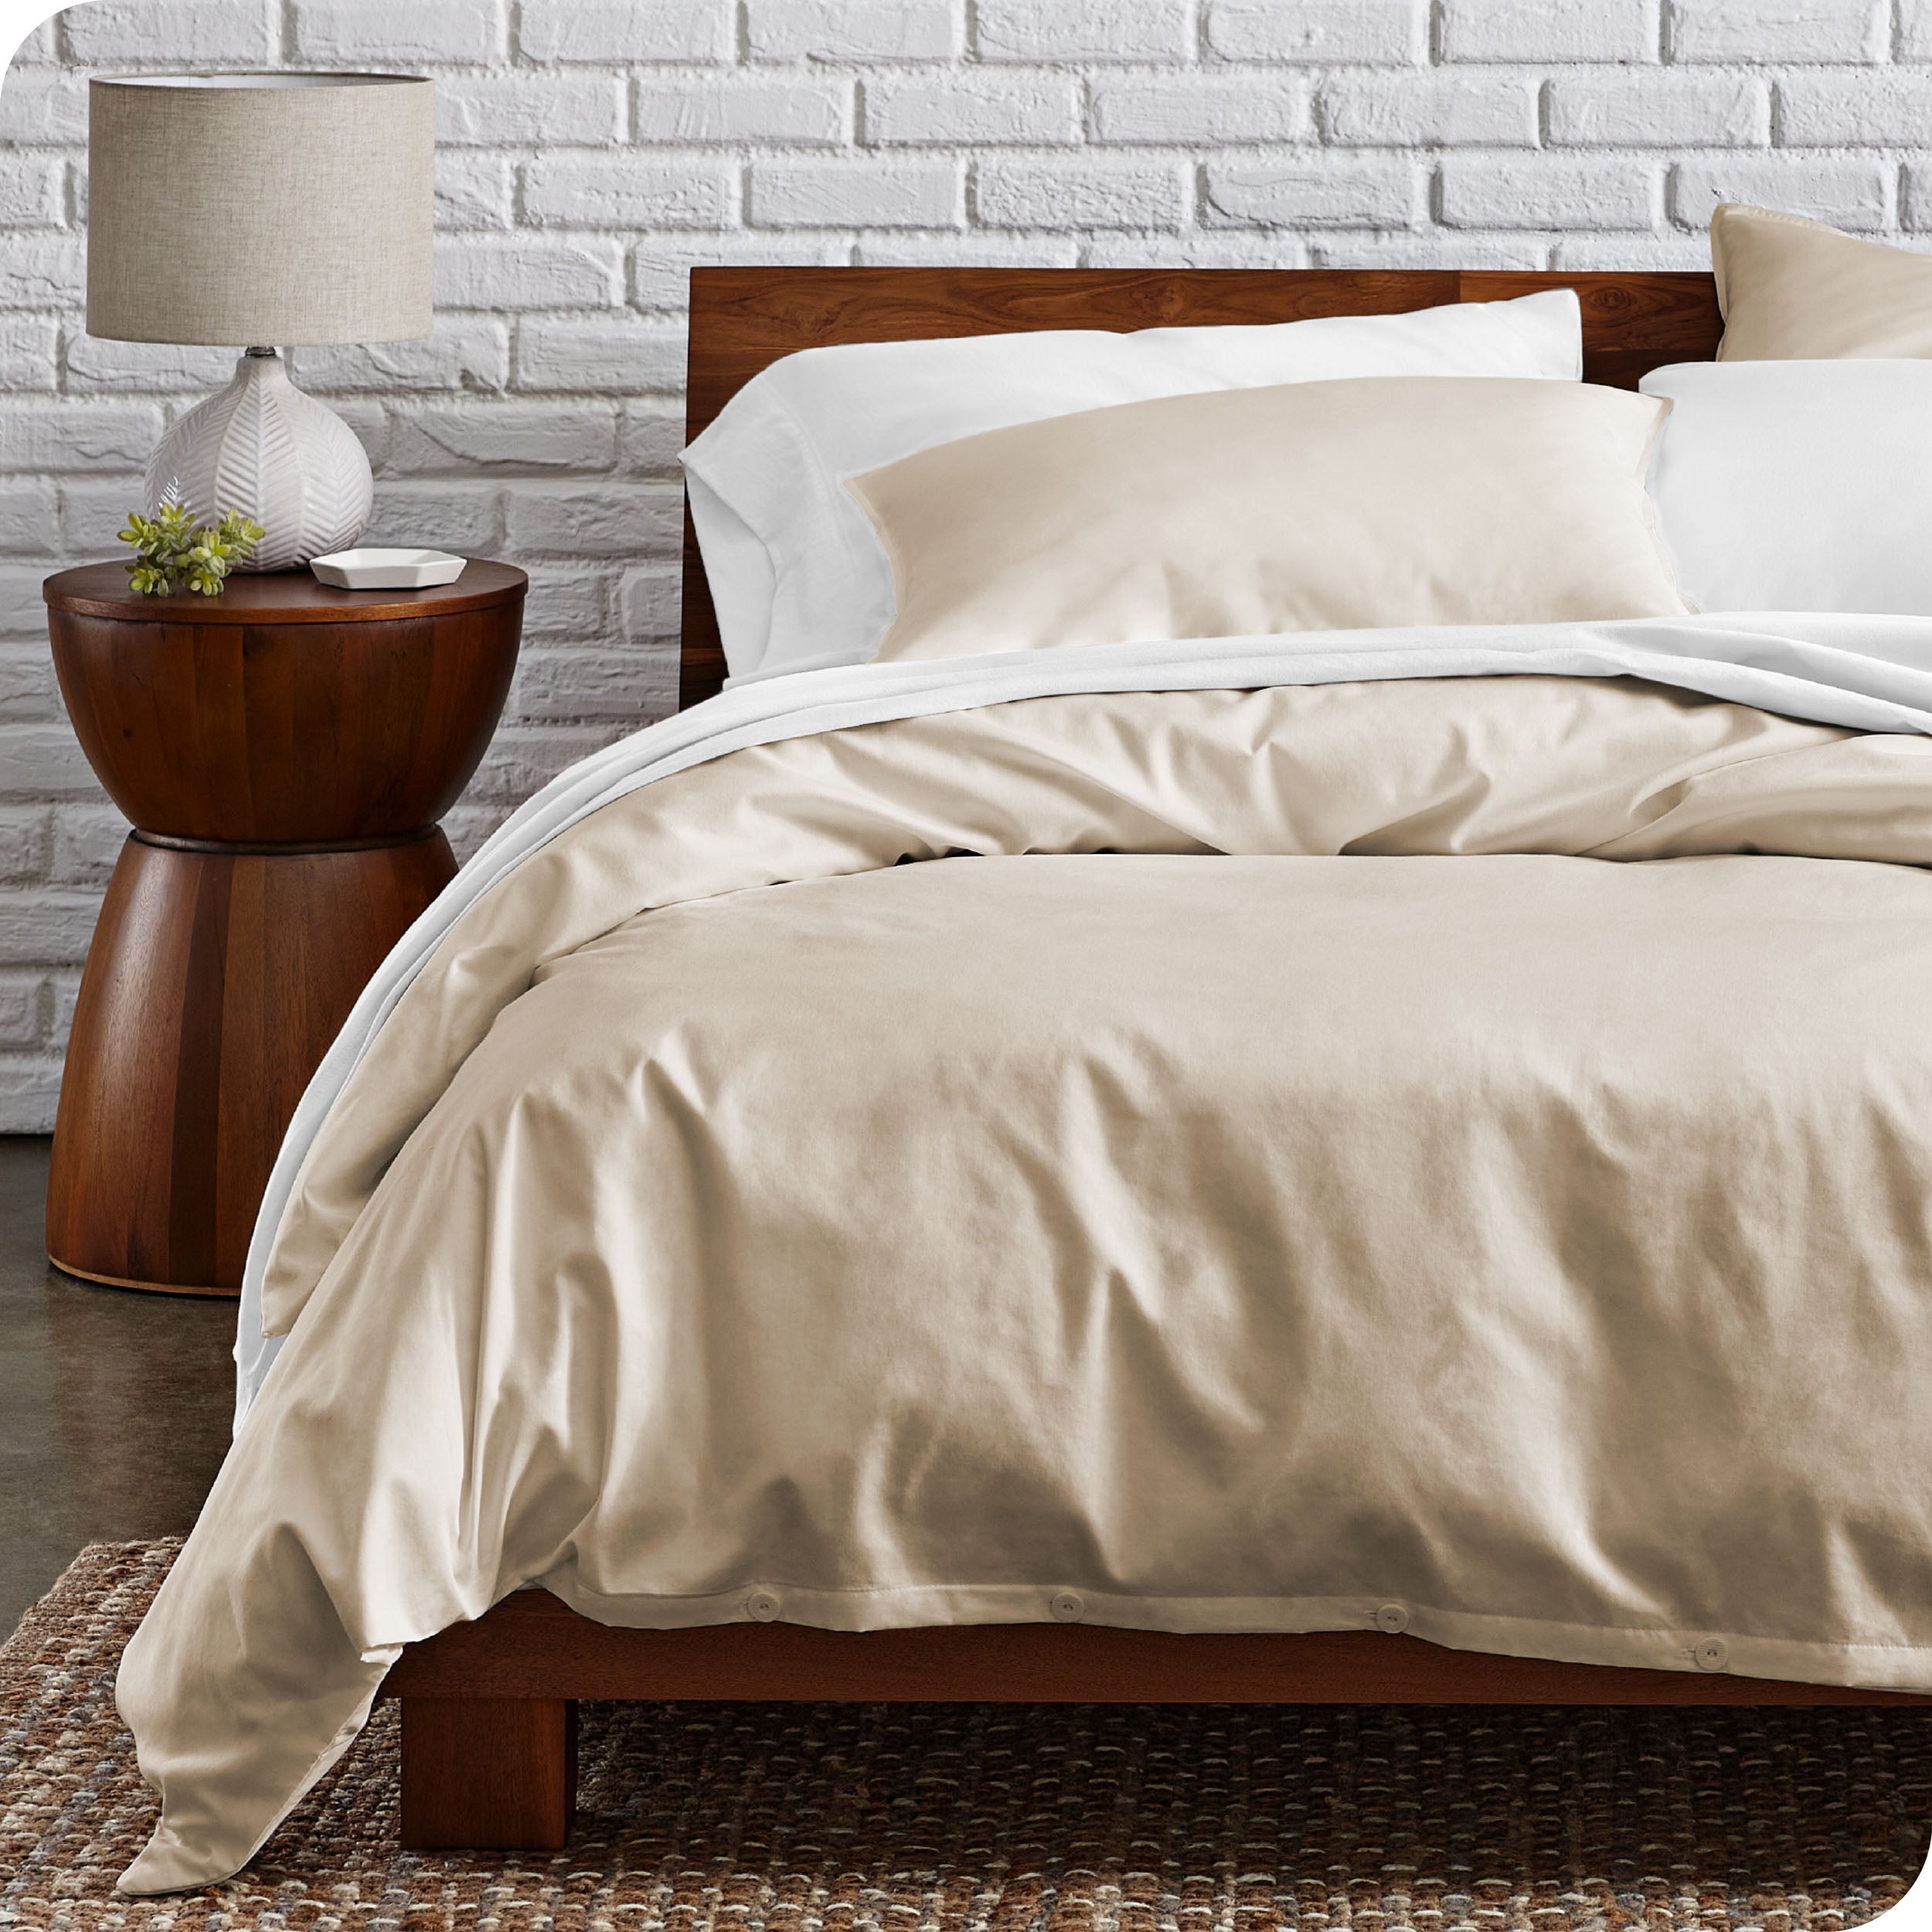 Percale duvet cover set on a bed in a modern bedroom